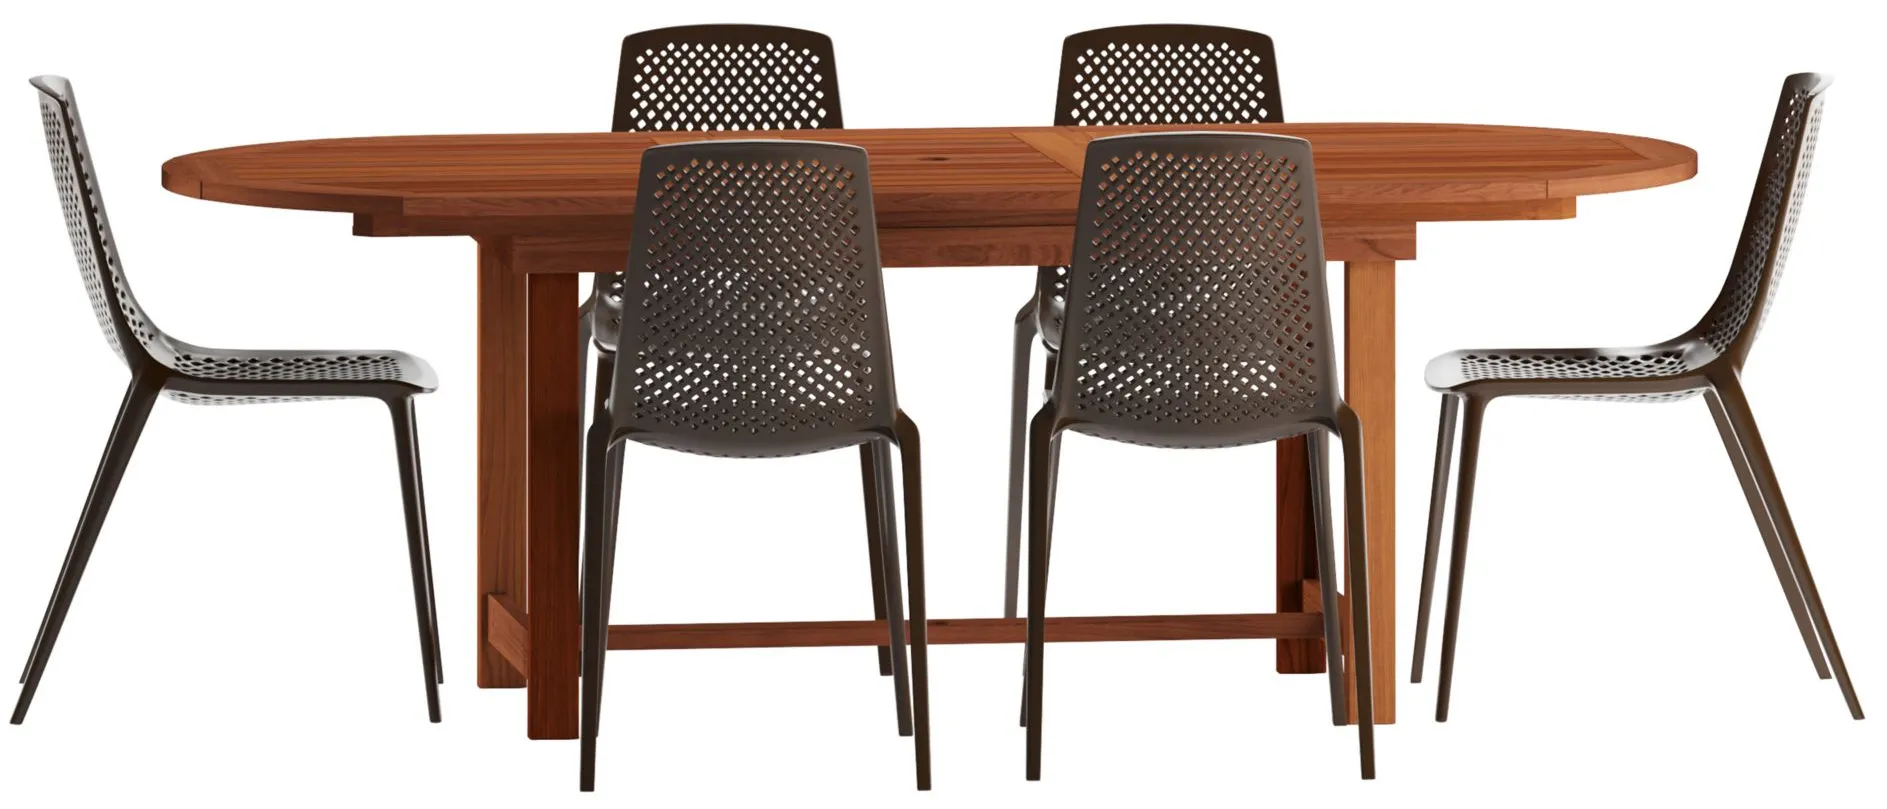 Amazonia 7-pc. Outdoor Oval Patio Dining Set in Brown by International Home Miami